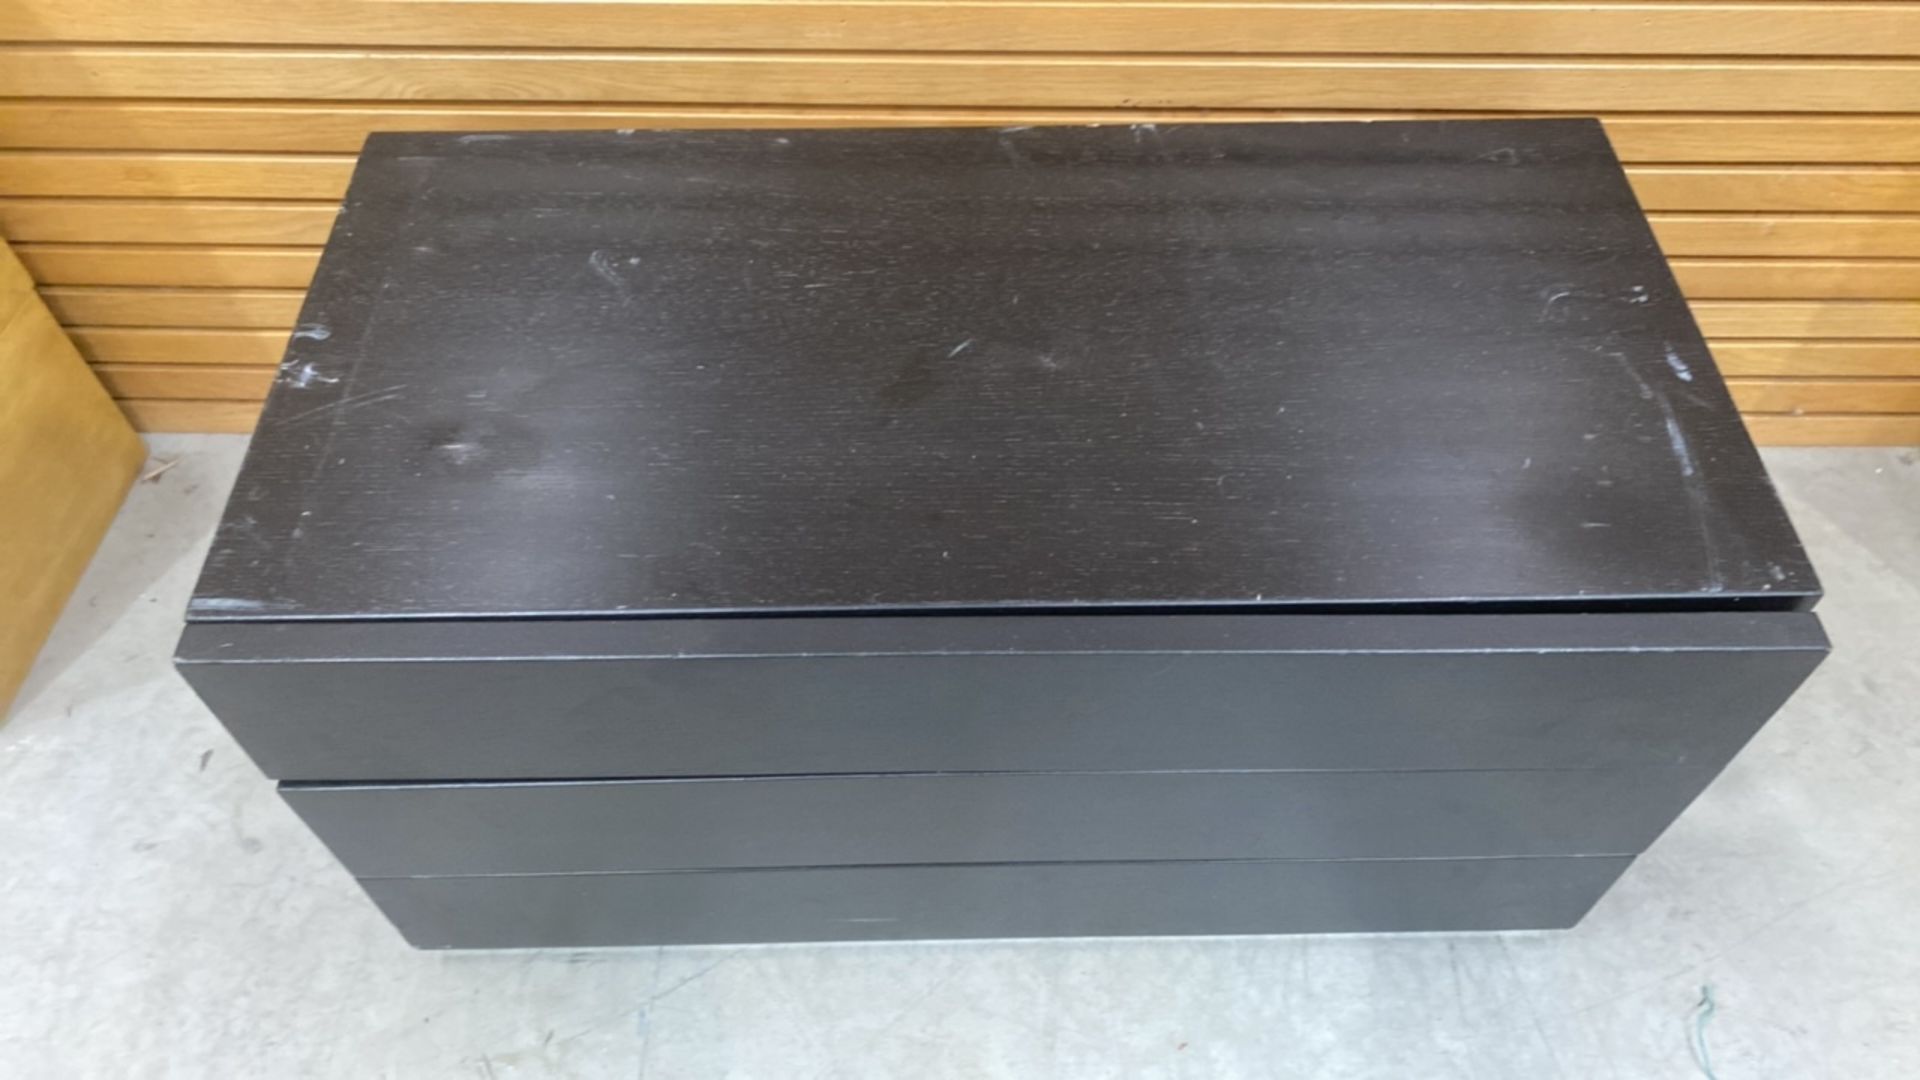 Black Wooden Cabinet With 2 Drawers - Image 2 of 3